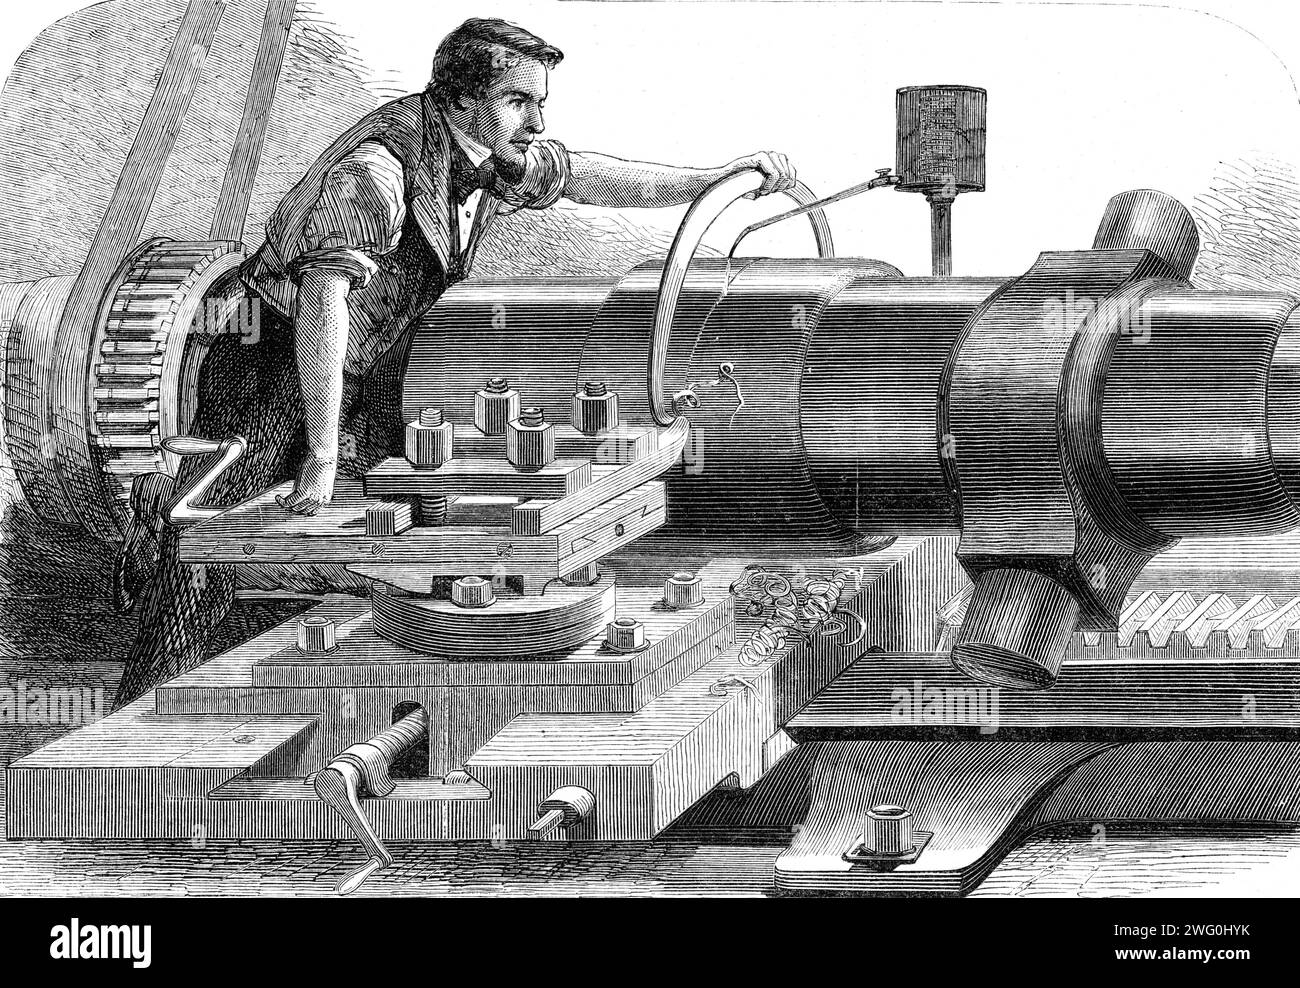 Manufacture of the Armstrong Gun at Woolwich Arsenal: finish-turning a 100-pounder, 1862. 'The gun, being now completely built up, is carried to a lathe for the purpose of being finish-turned, as is shown in our Illustration...This is performed in a portion of a lofty and extensive building, which we were told was formerly used as a foundry for the casting of the old pattern-guns, but has been transformed into two or three large shops, in which are powerful turning-lathes and other machines used in connection with the heavier class of guns. The workman in the Engraving is seen applying a gauge Stock Photo